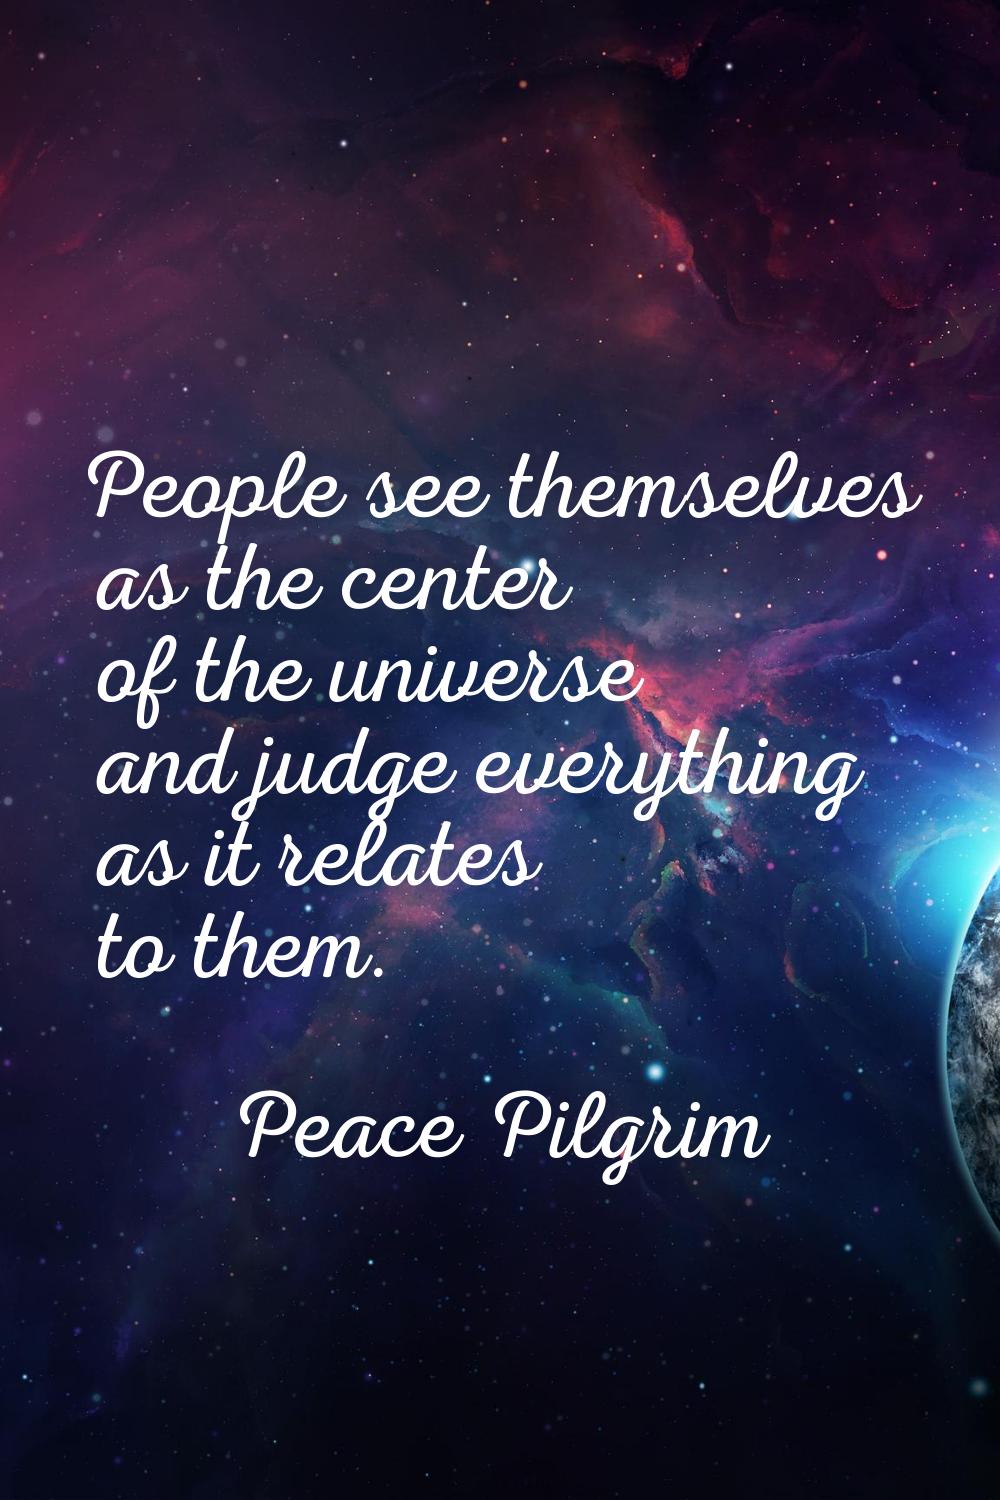 People see themselves as the center of the universe and judge everything as it relates to them.